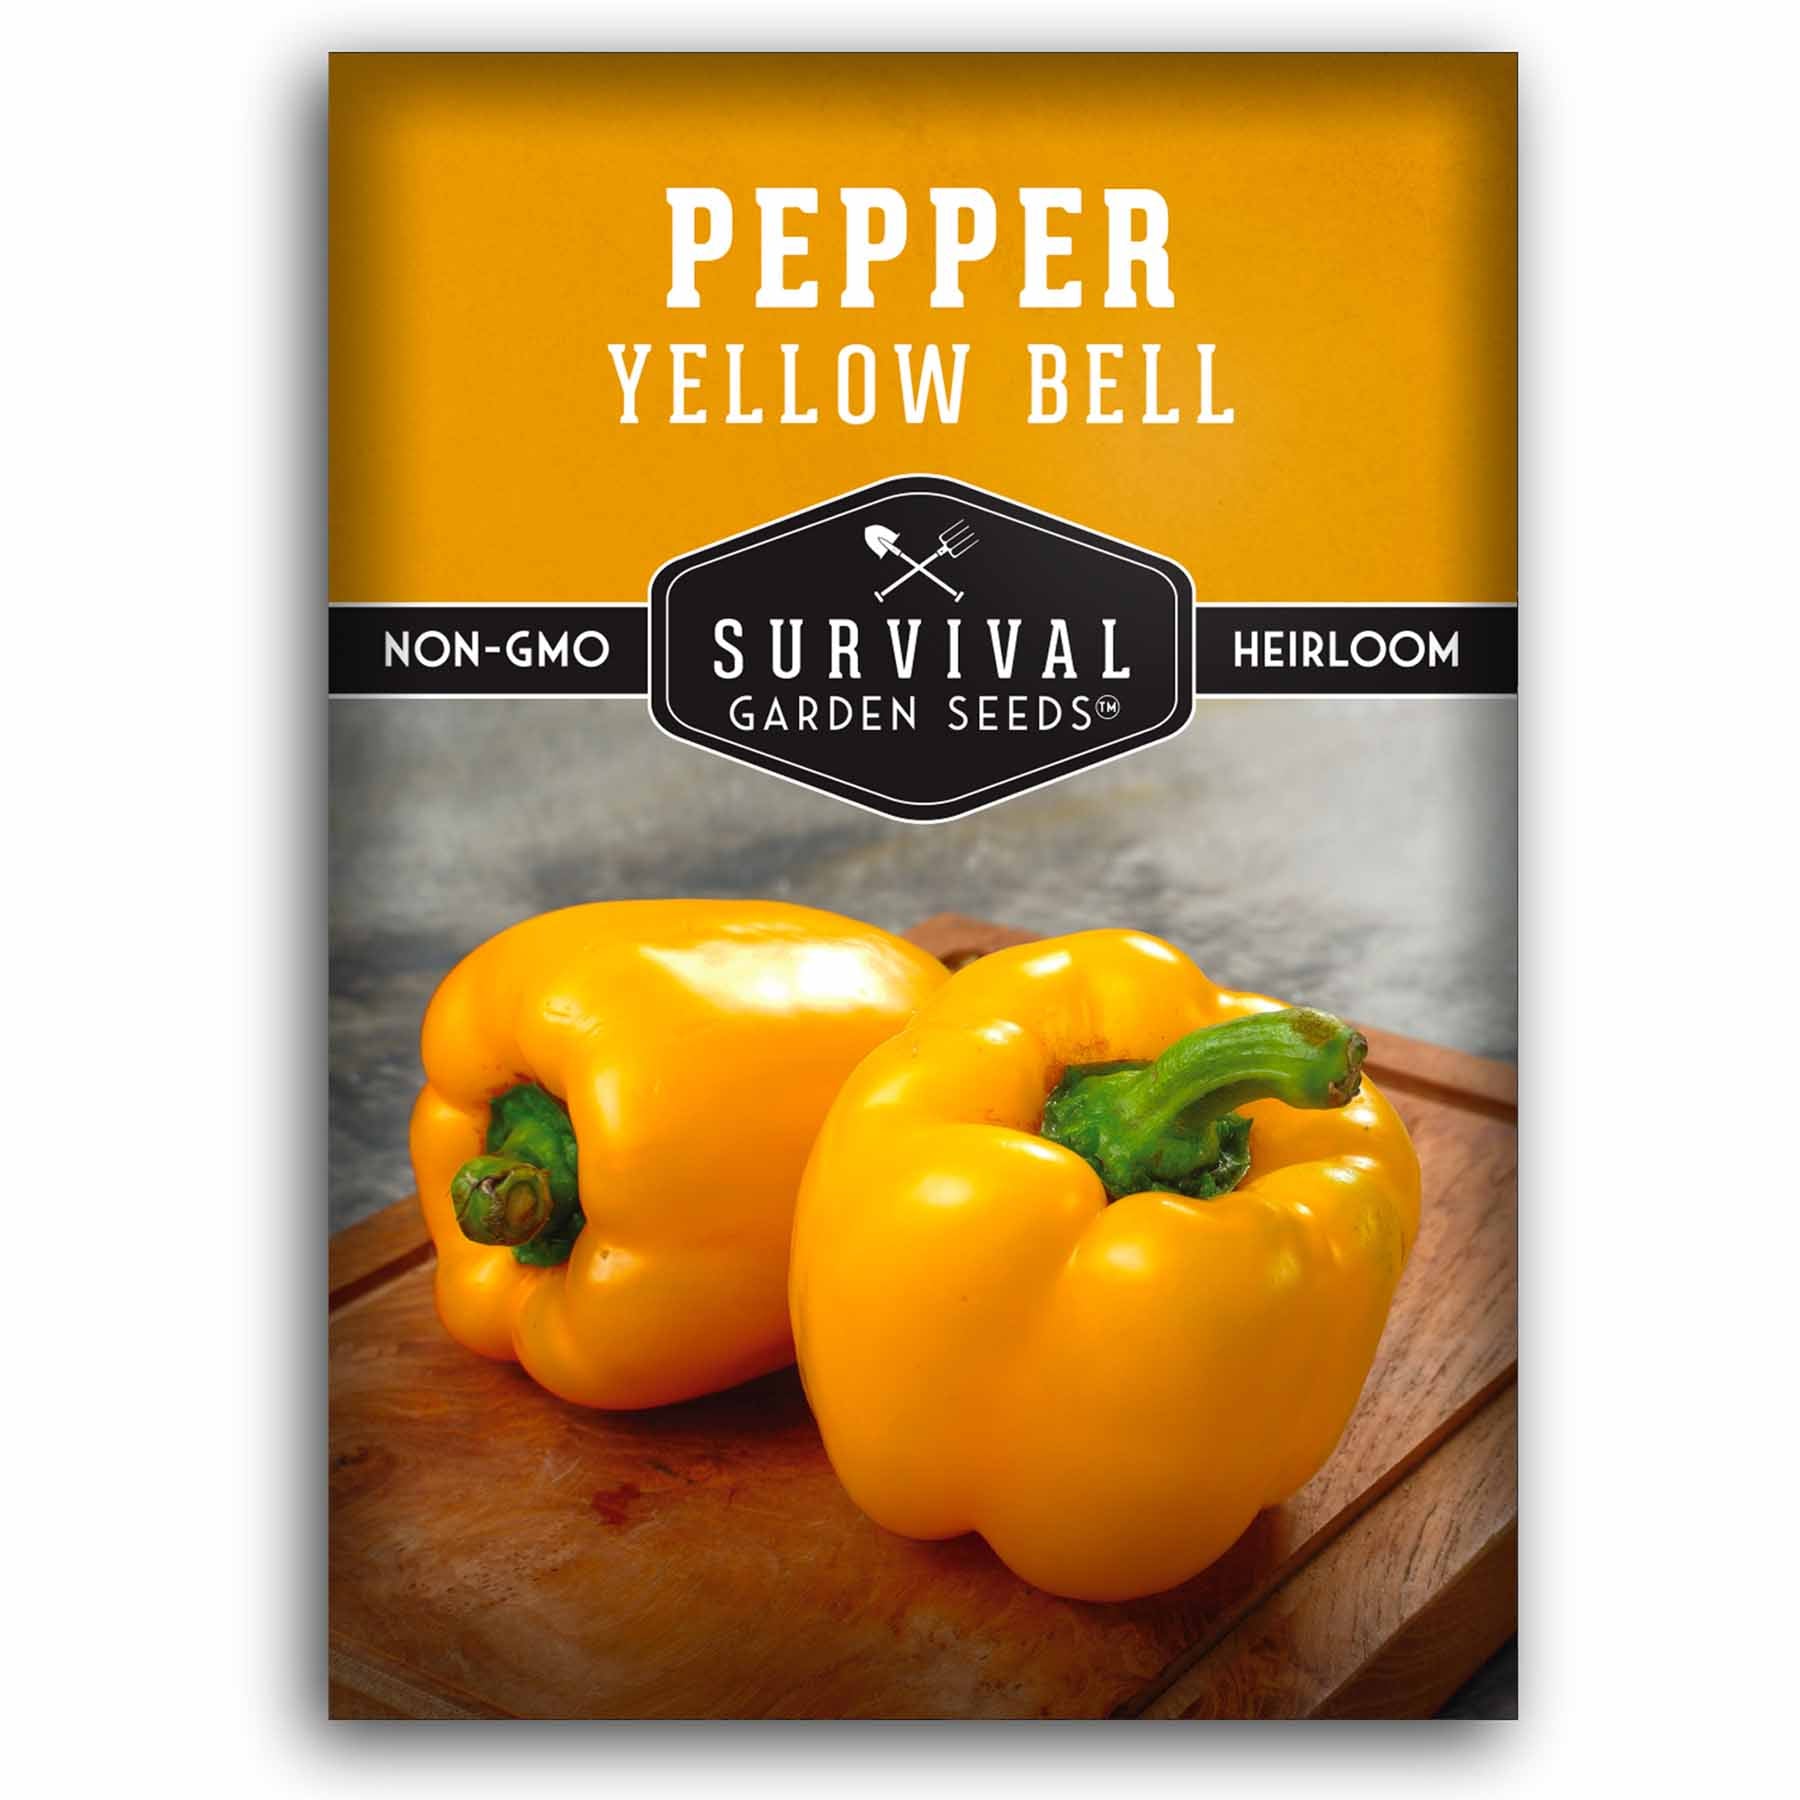 1 packet of Yellow Bell Pepper seeds